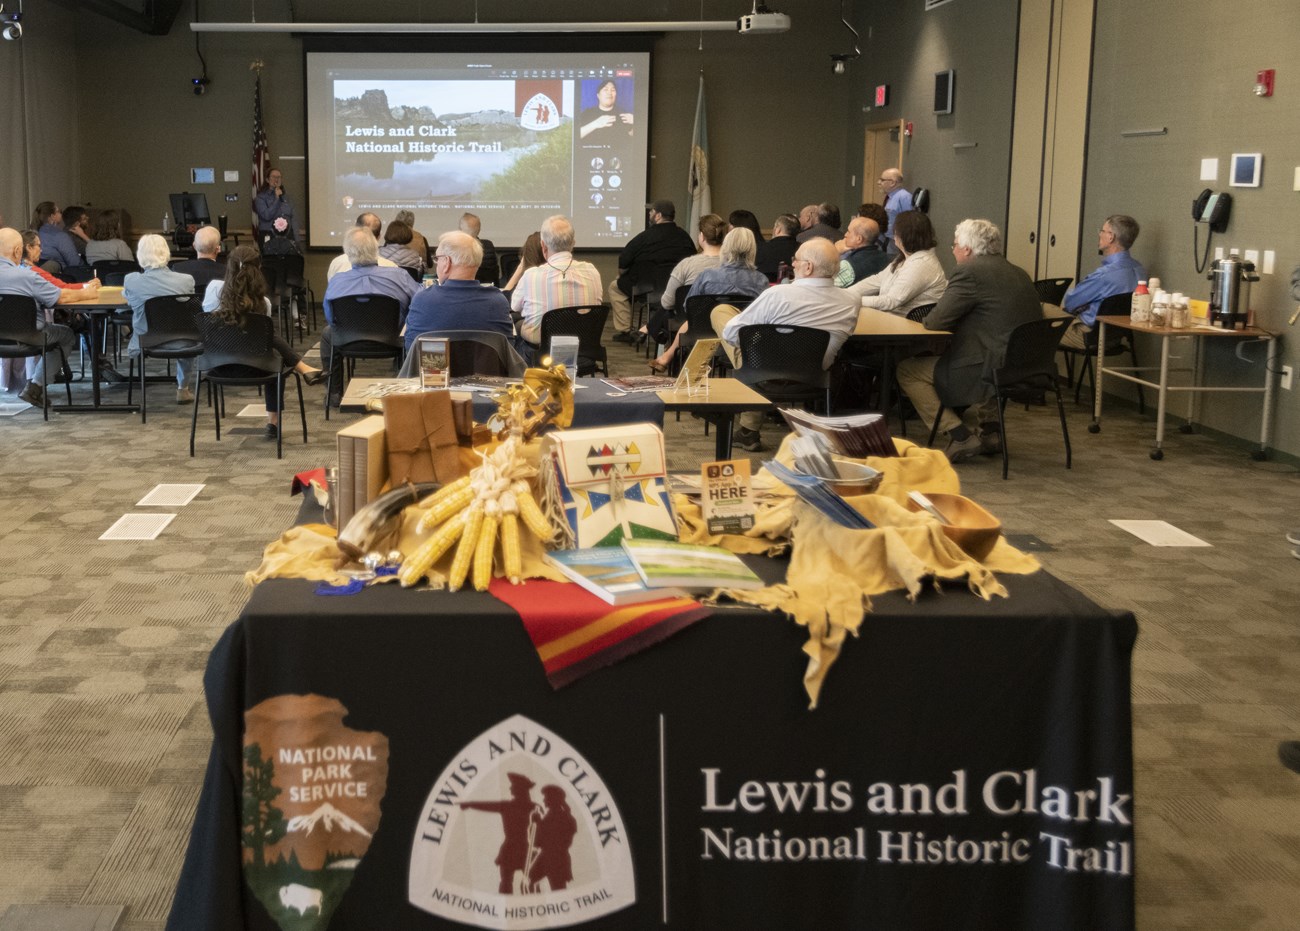 A table covered in items relating to Lewis and Clark with people in the background